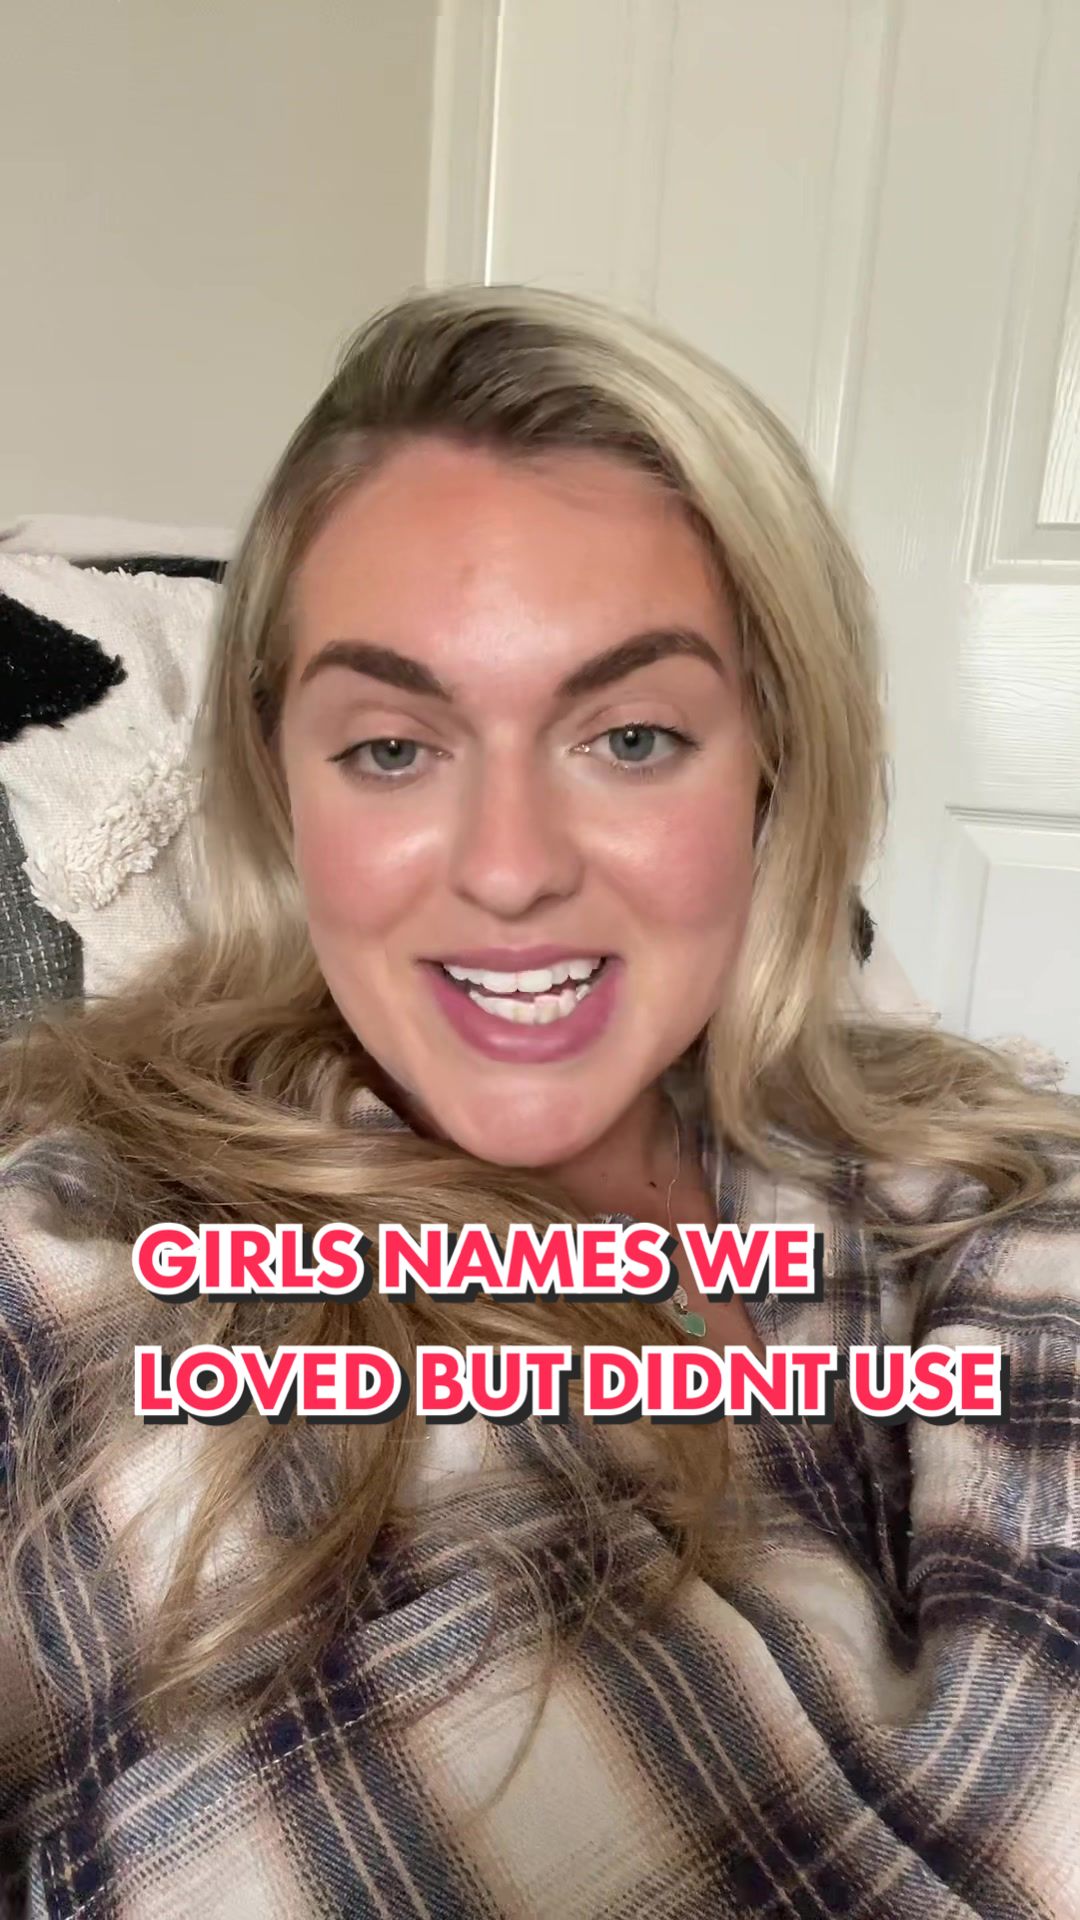 @lifewithlivs Girls names we loved but didnt use #girlsname #girlsnames #uniqueg...